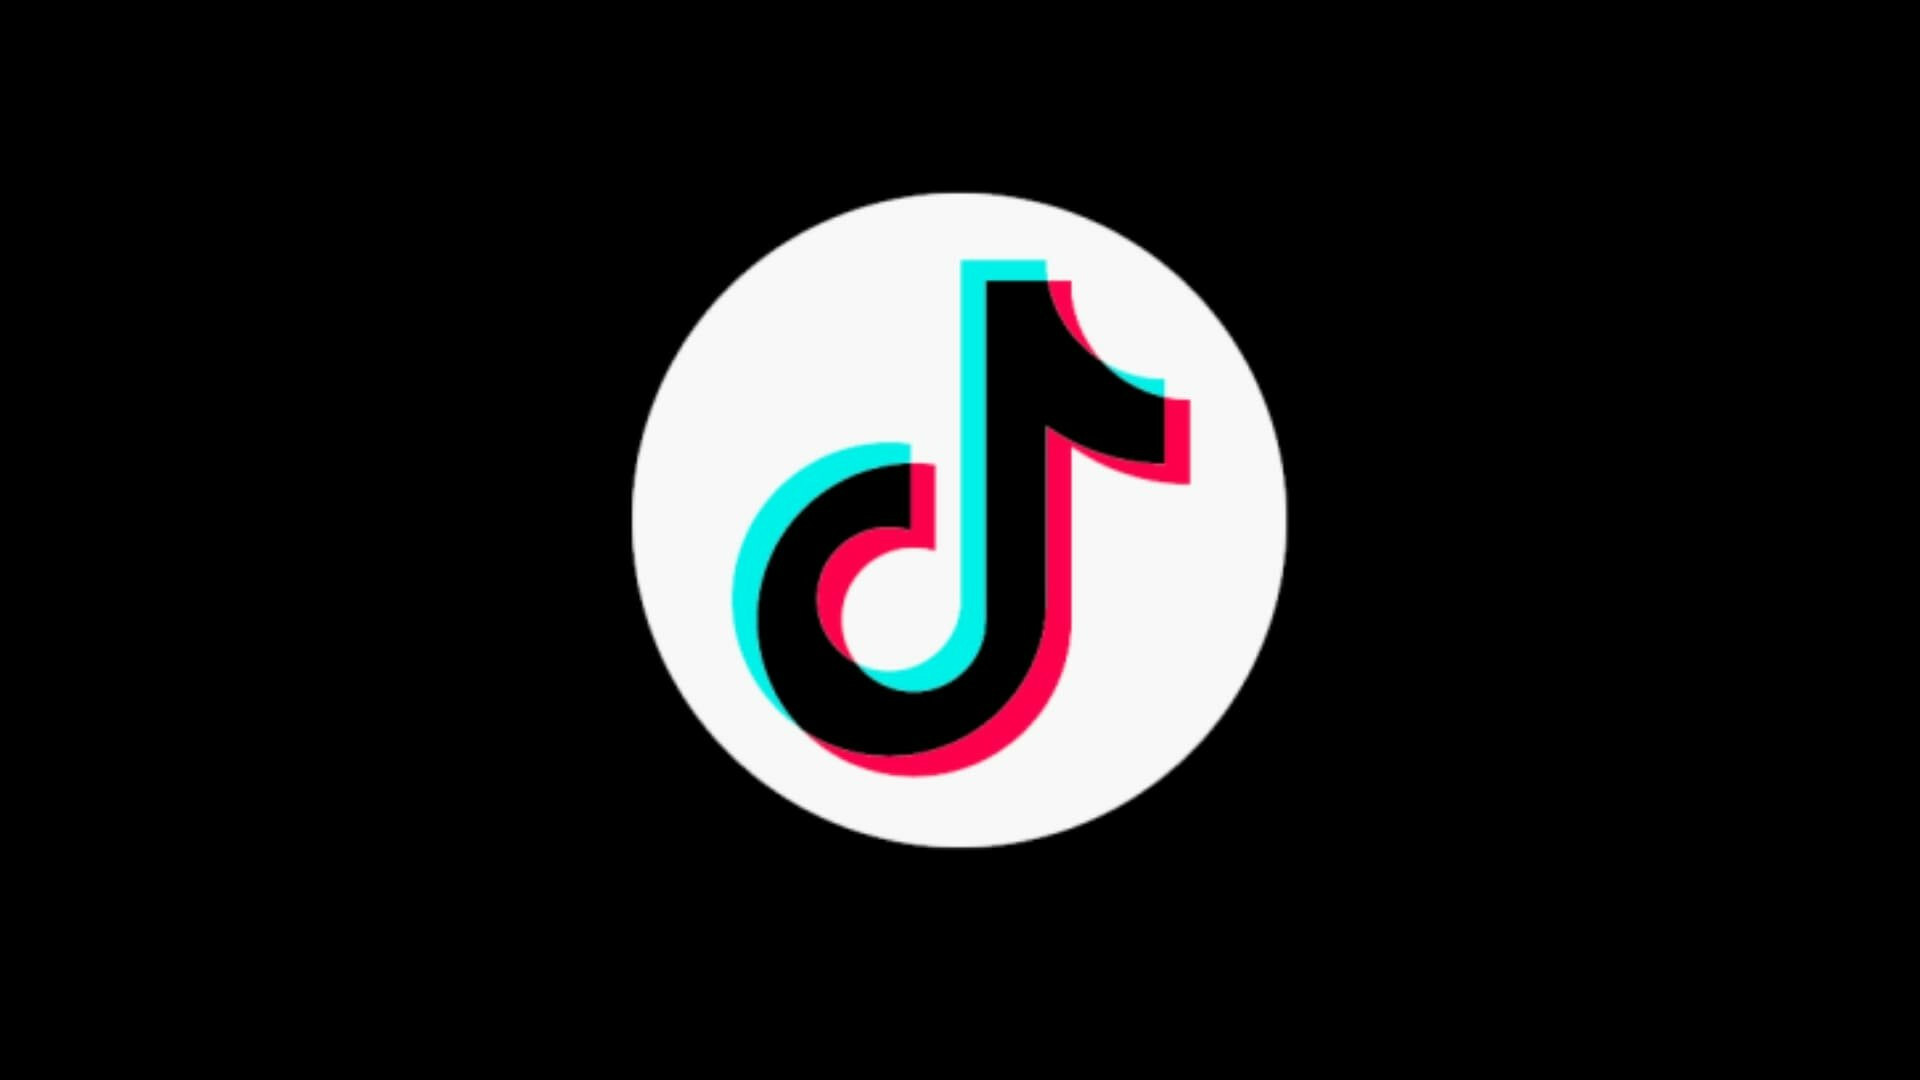 TikTok: A media app primarily for lip-syncing and dancing videos, ByteDance. 1920x1080 Full HD Wallpaper.